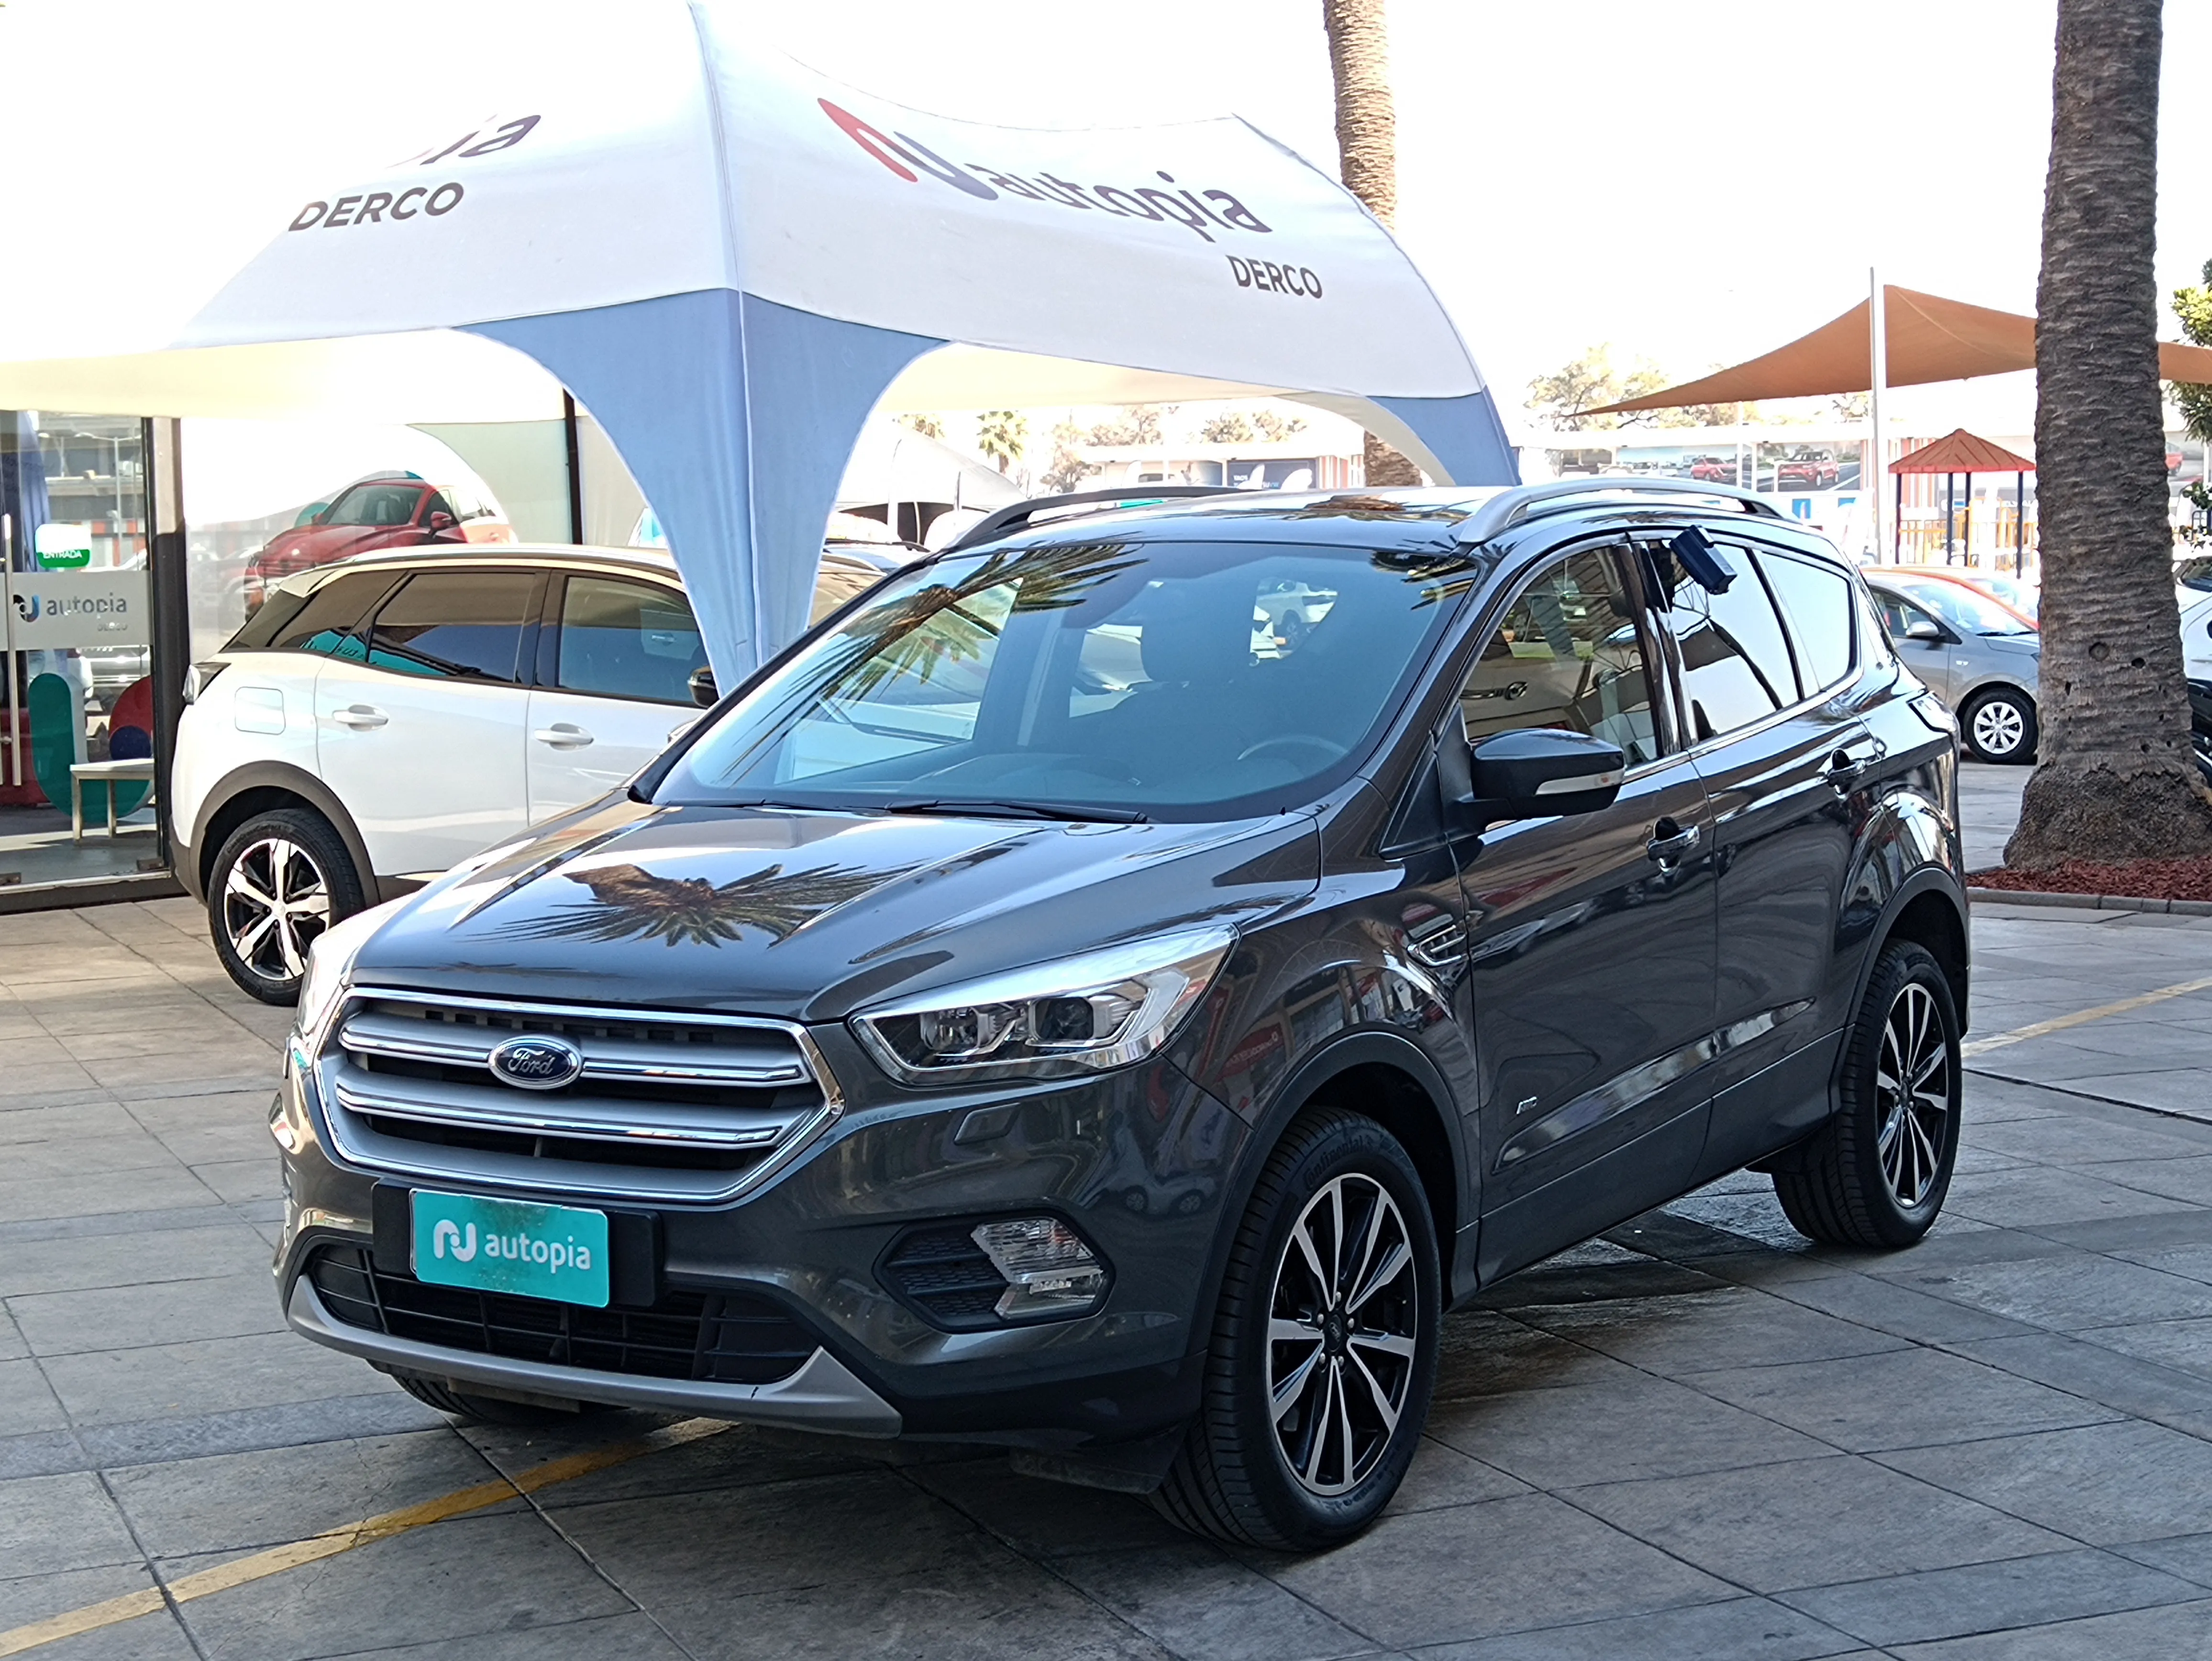 FORD ESCAPE 2.0 SE ECOBOOST AT 4X4 2018